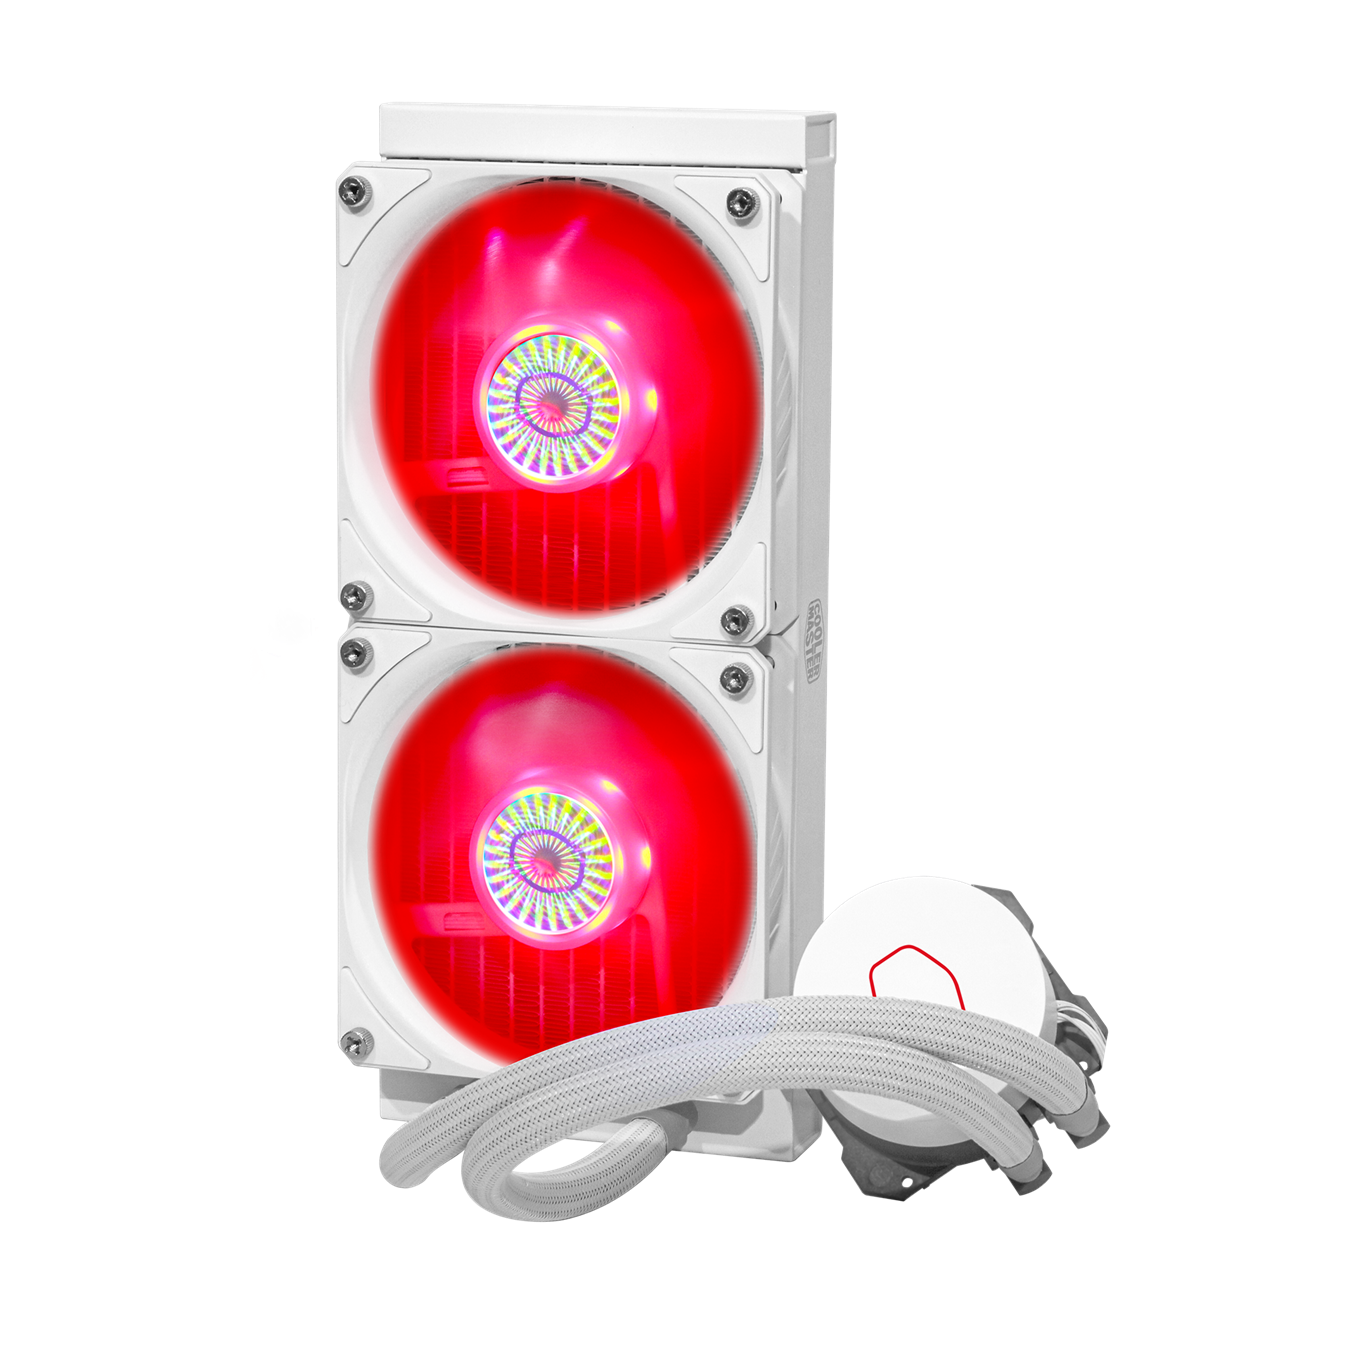 The fans had been upgraded to the latest SickleFlow120 ARGB White Edition fans utilizing Air Balance fan blades, quieter than before without compromising air flow and pressure. Match your clean, white build with this new color release.